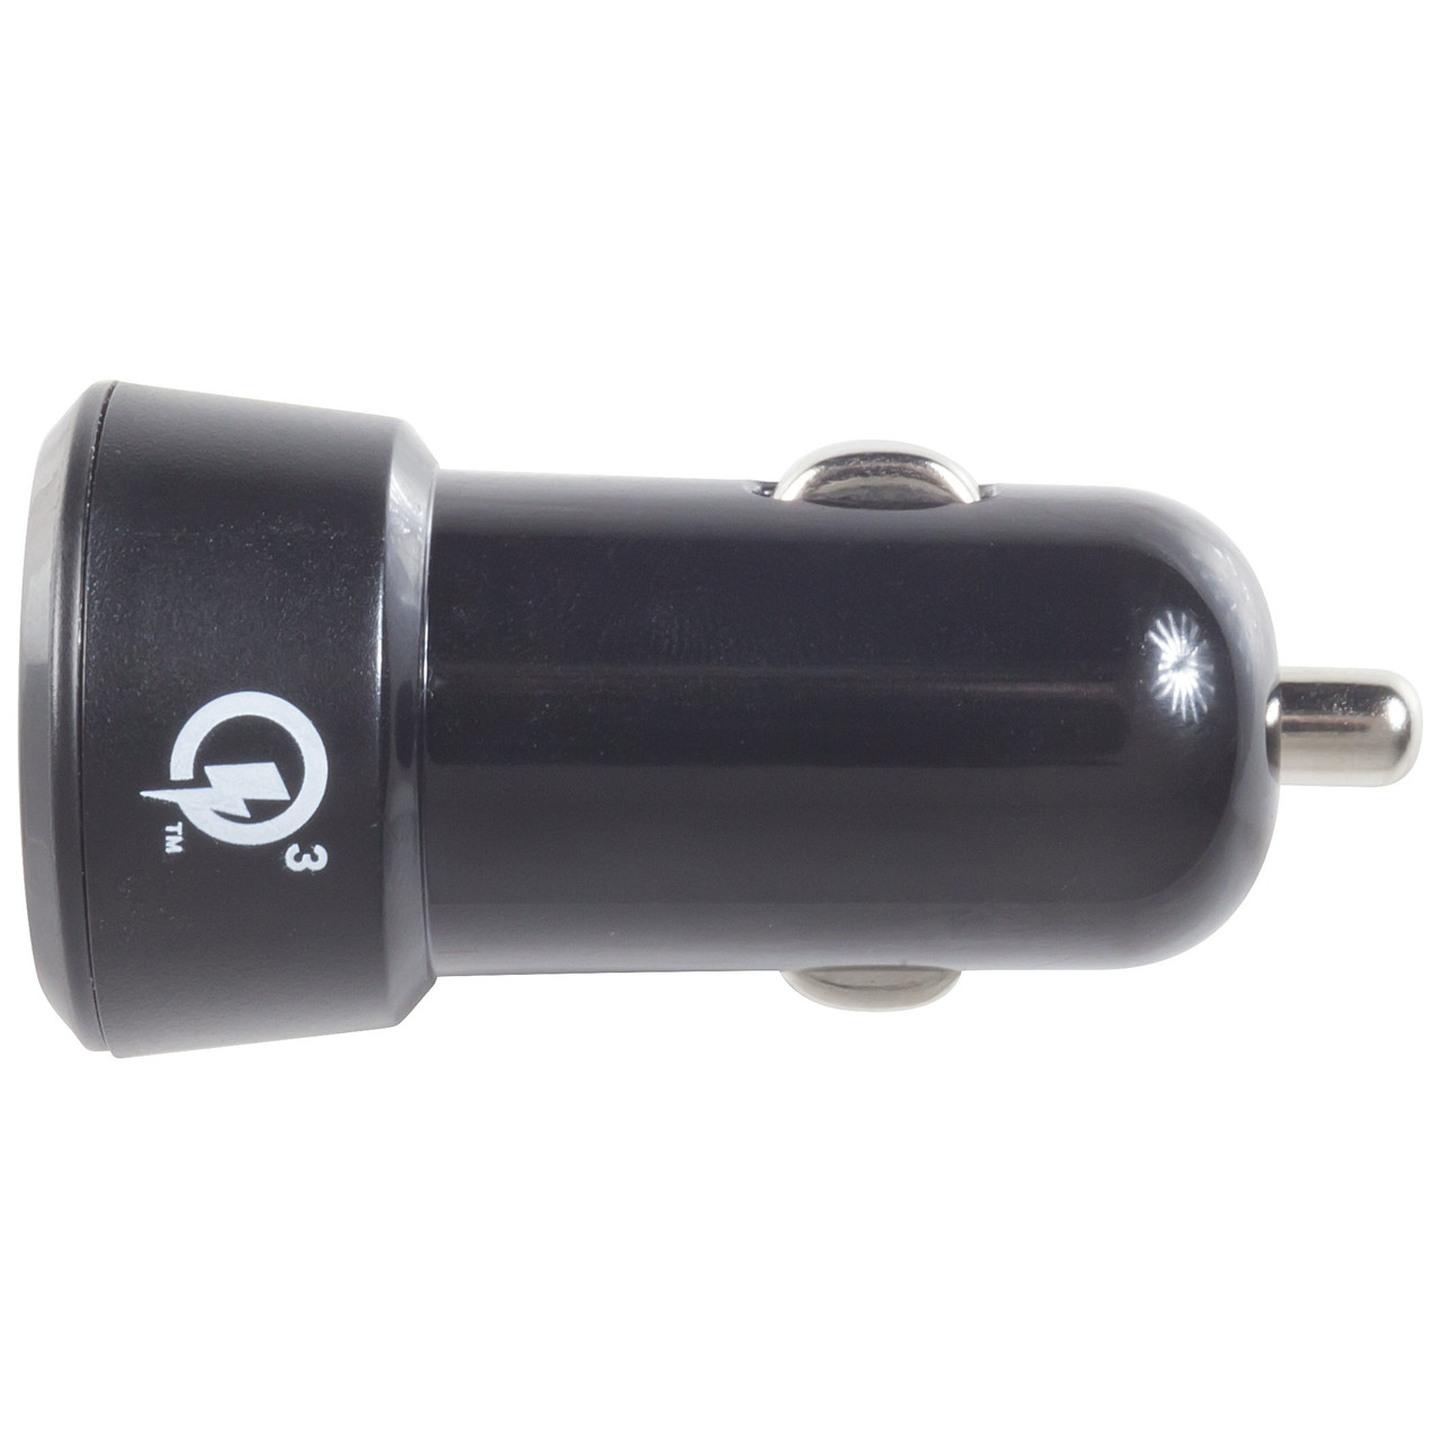 3A Quick Charge 3.0 USB Car Cigarette Lighter Adaptor